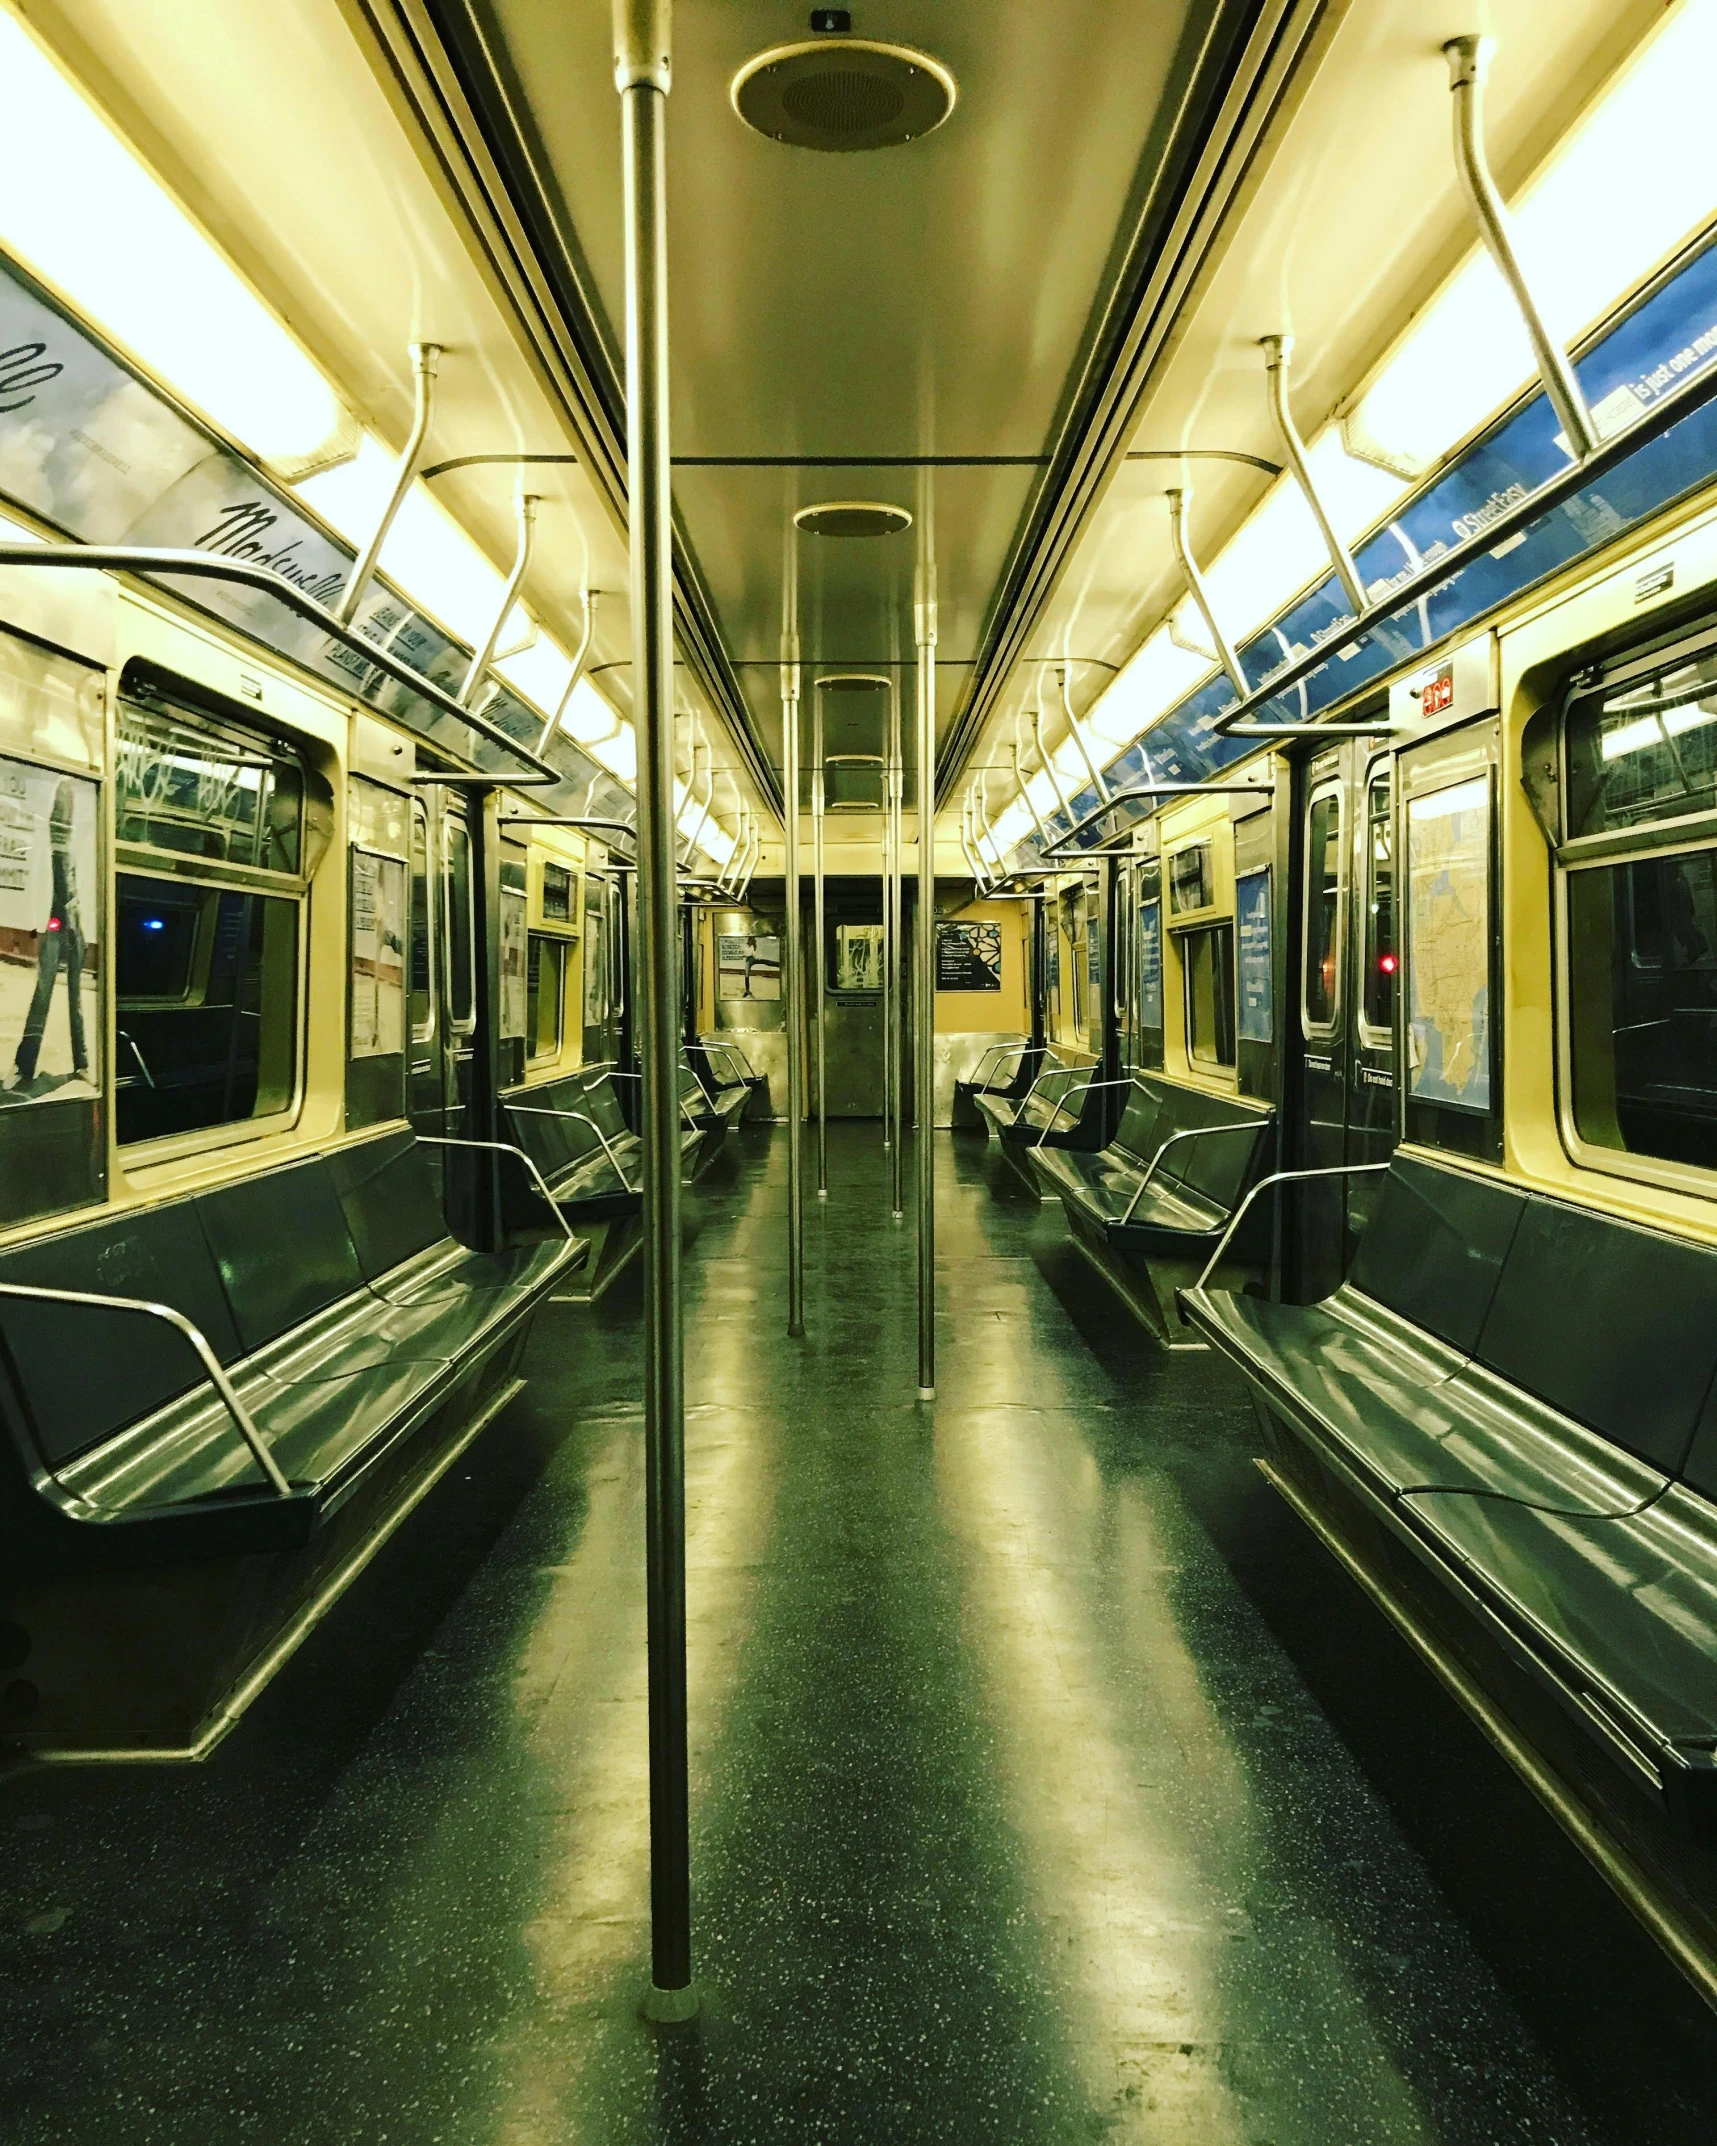 there is a empty metro car that has the lights on